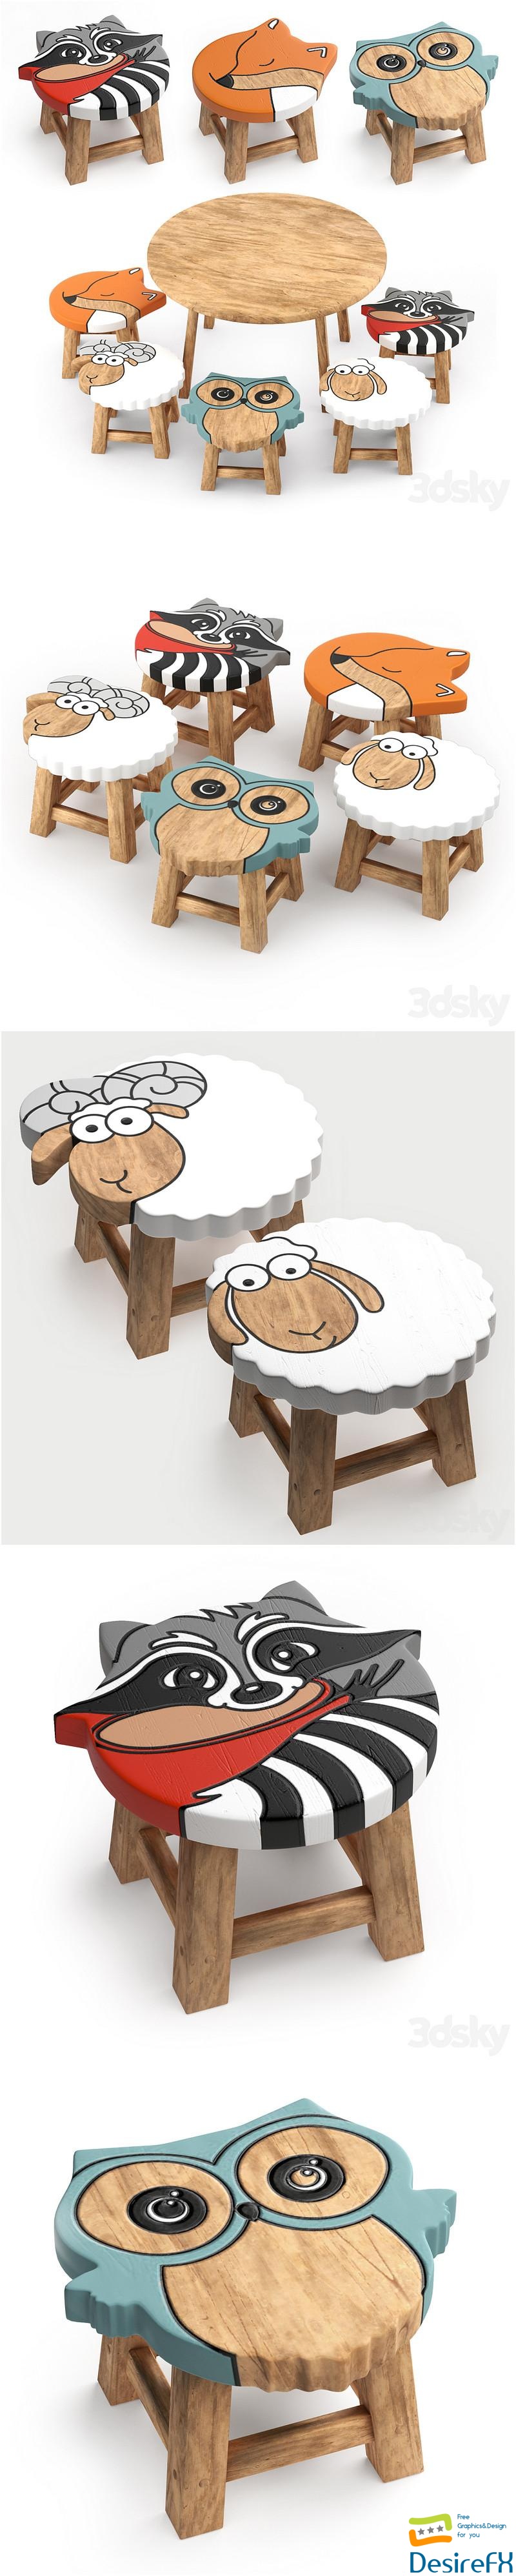 Kids furniture01-animal chairs 3D Model